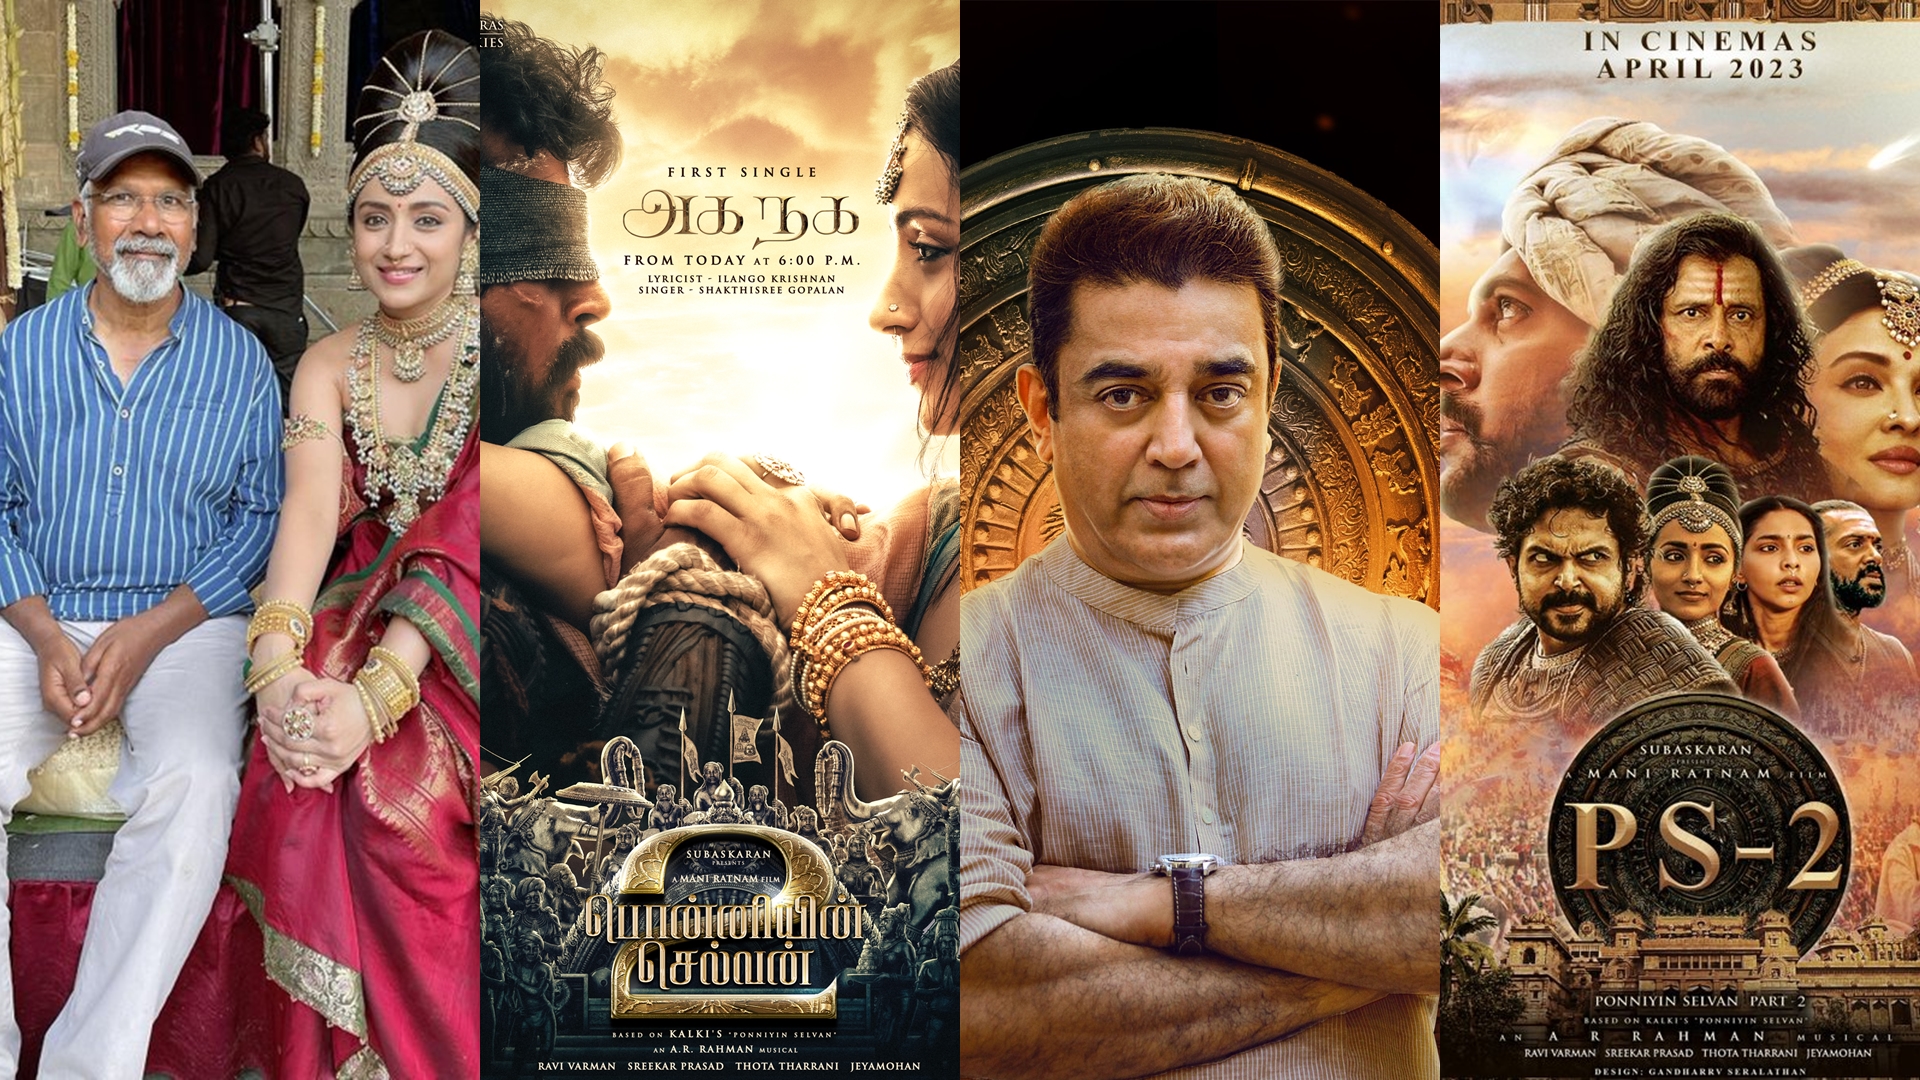 Ponniyin Selvan Part 2 Trailer Released by Kamal Hassan